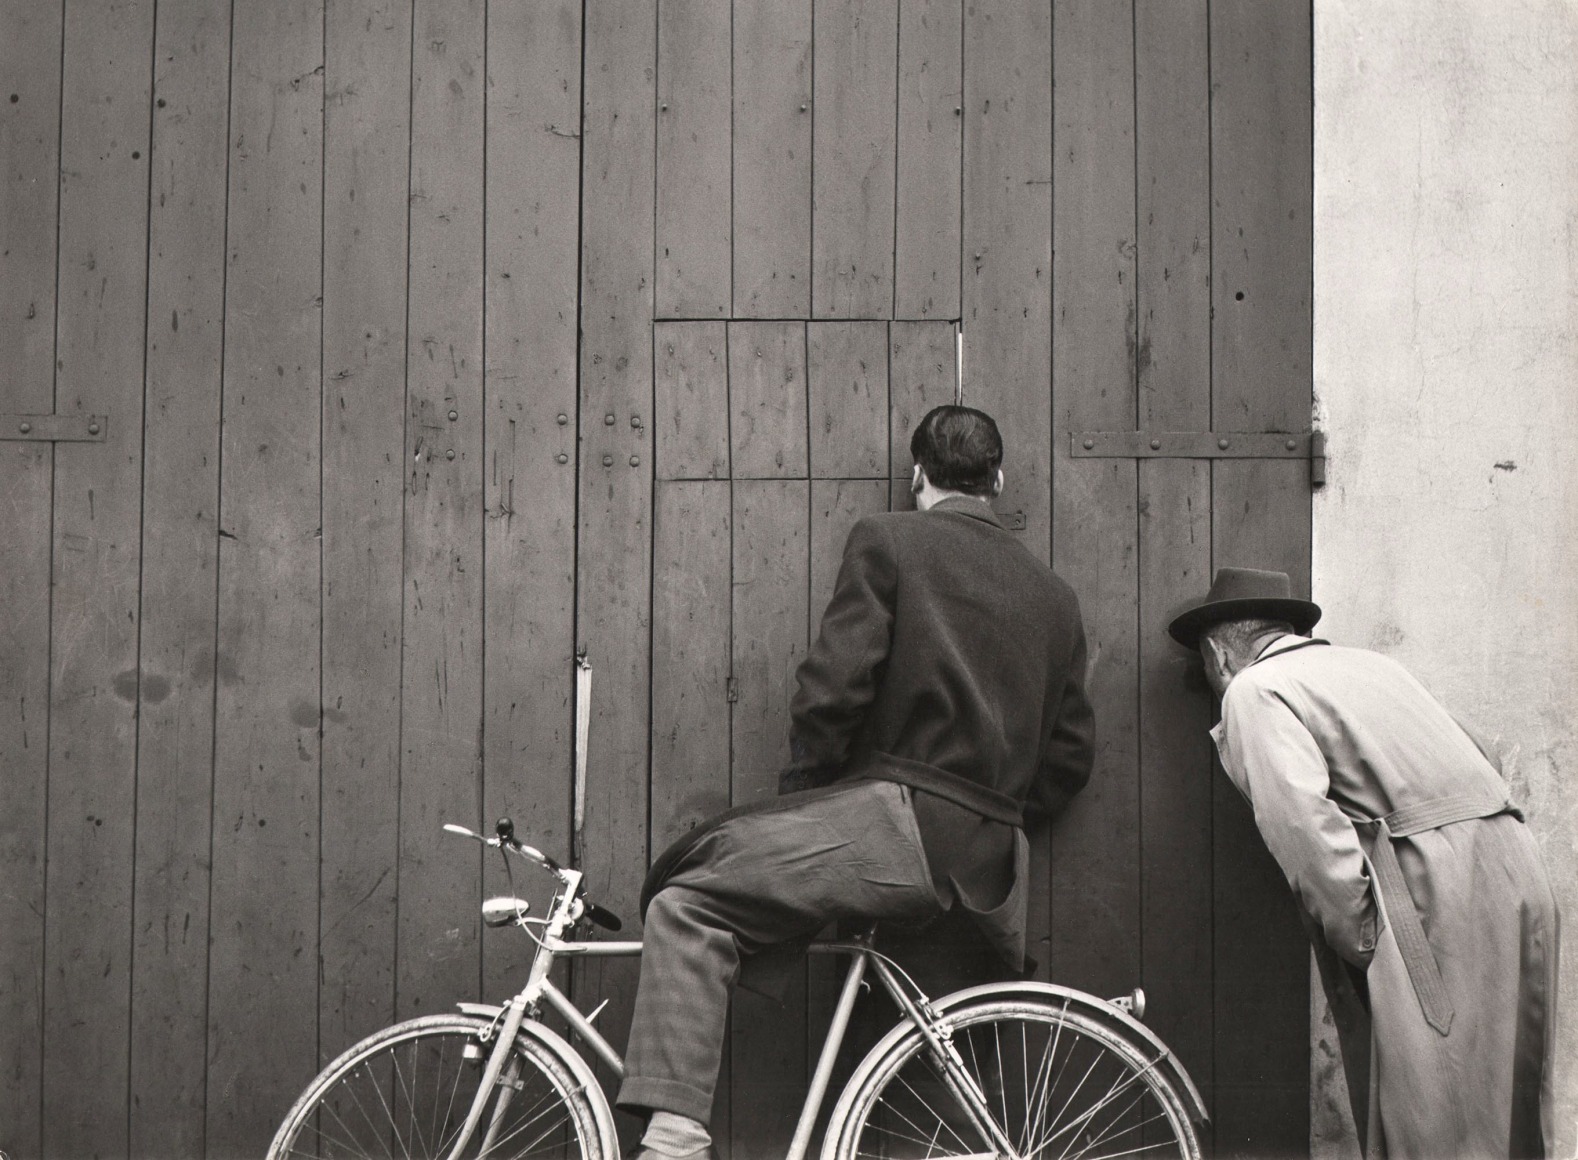 Stanislao Farri, Curiosit&agrave;, ​1958. One man on a bicycle and one standing peer into the spaces between the wooden slats of a door.